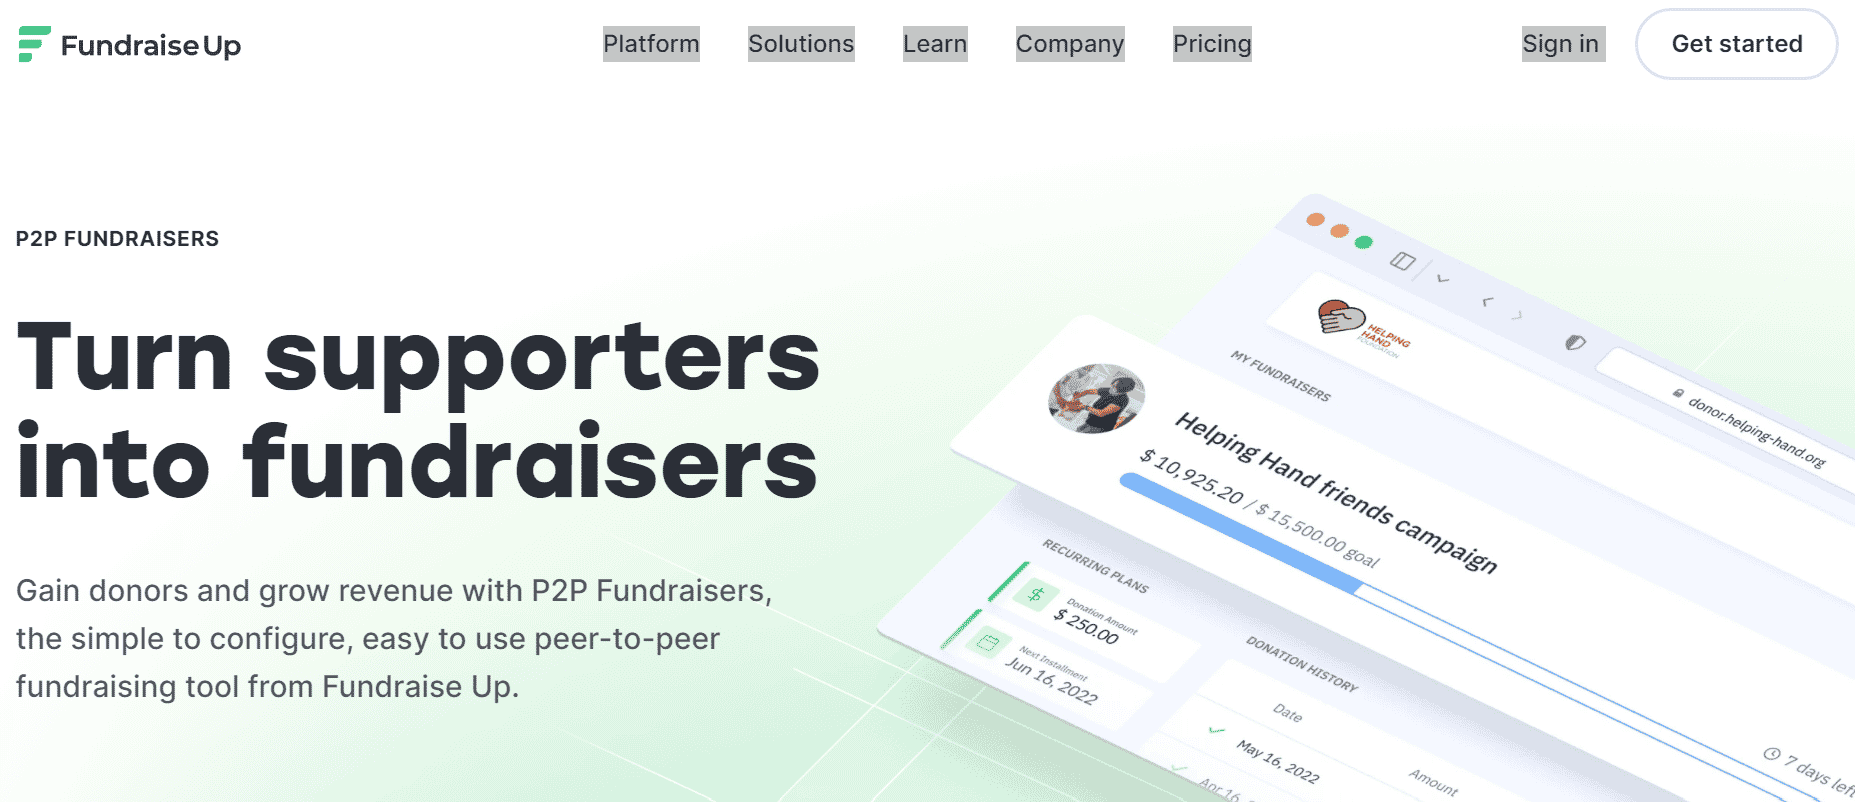 Fundraise Up offers turnkey peer-to-peer fundraising tools as part of their fundraising platform. 